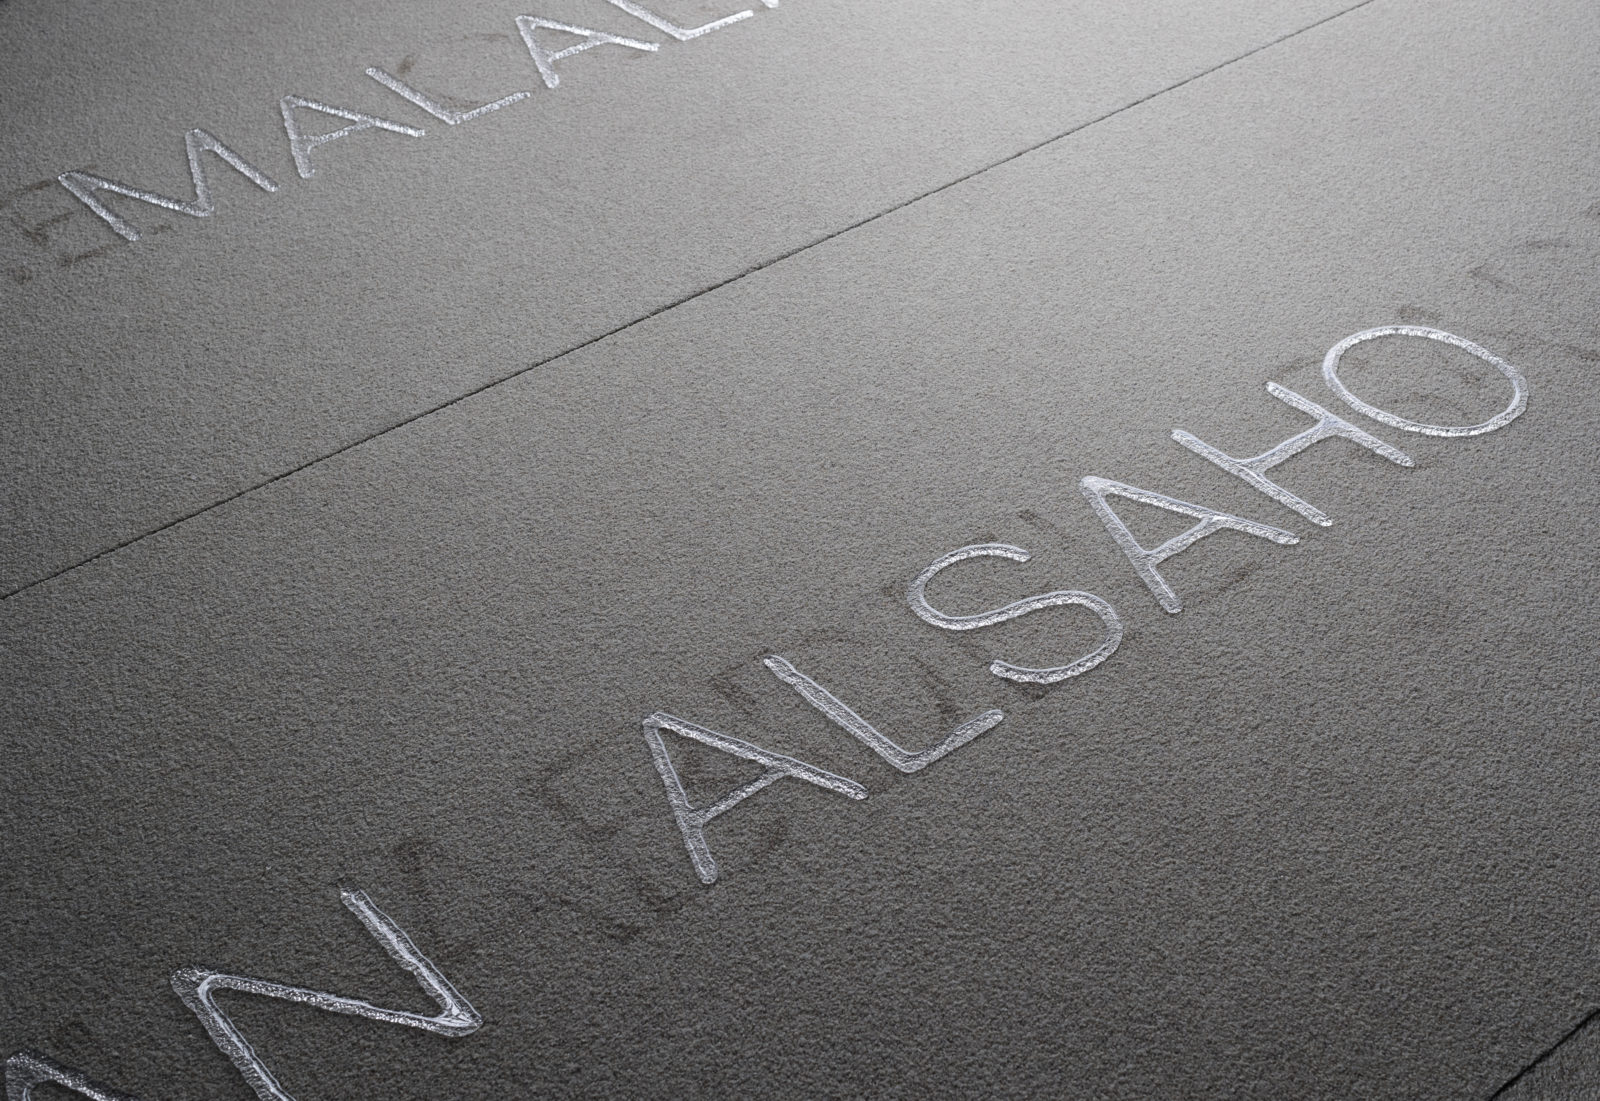 Black and white photograph of a soft, textured surface with layers of simple, san serif capitalized font moving diagonally from bottom right to top left. Dark font that is barely visible lays underneath lighter font that is more prominent and clearer, spelling the name “ALSAHO.”